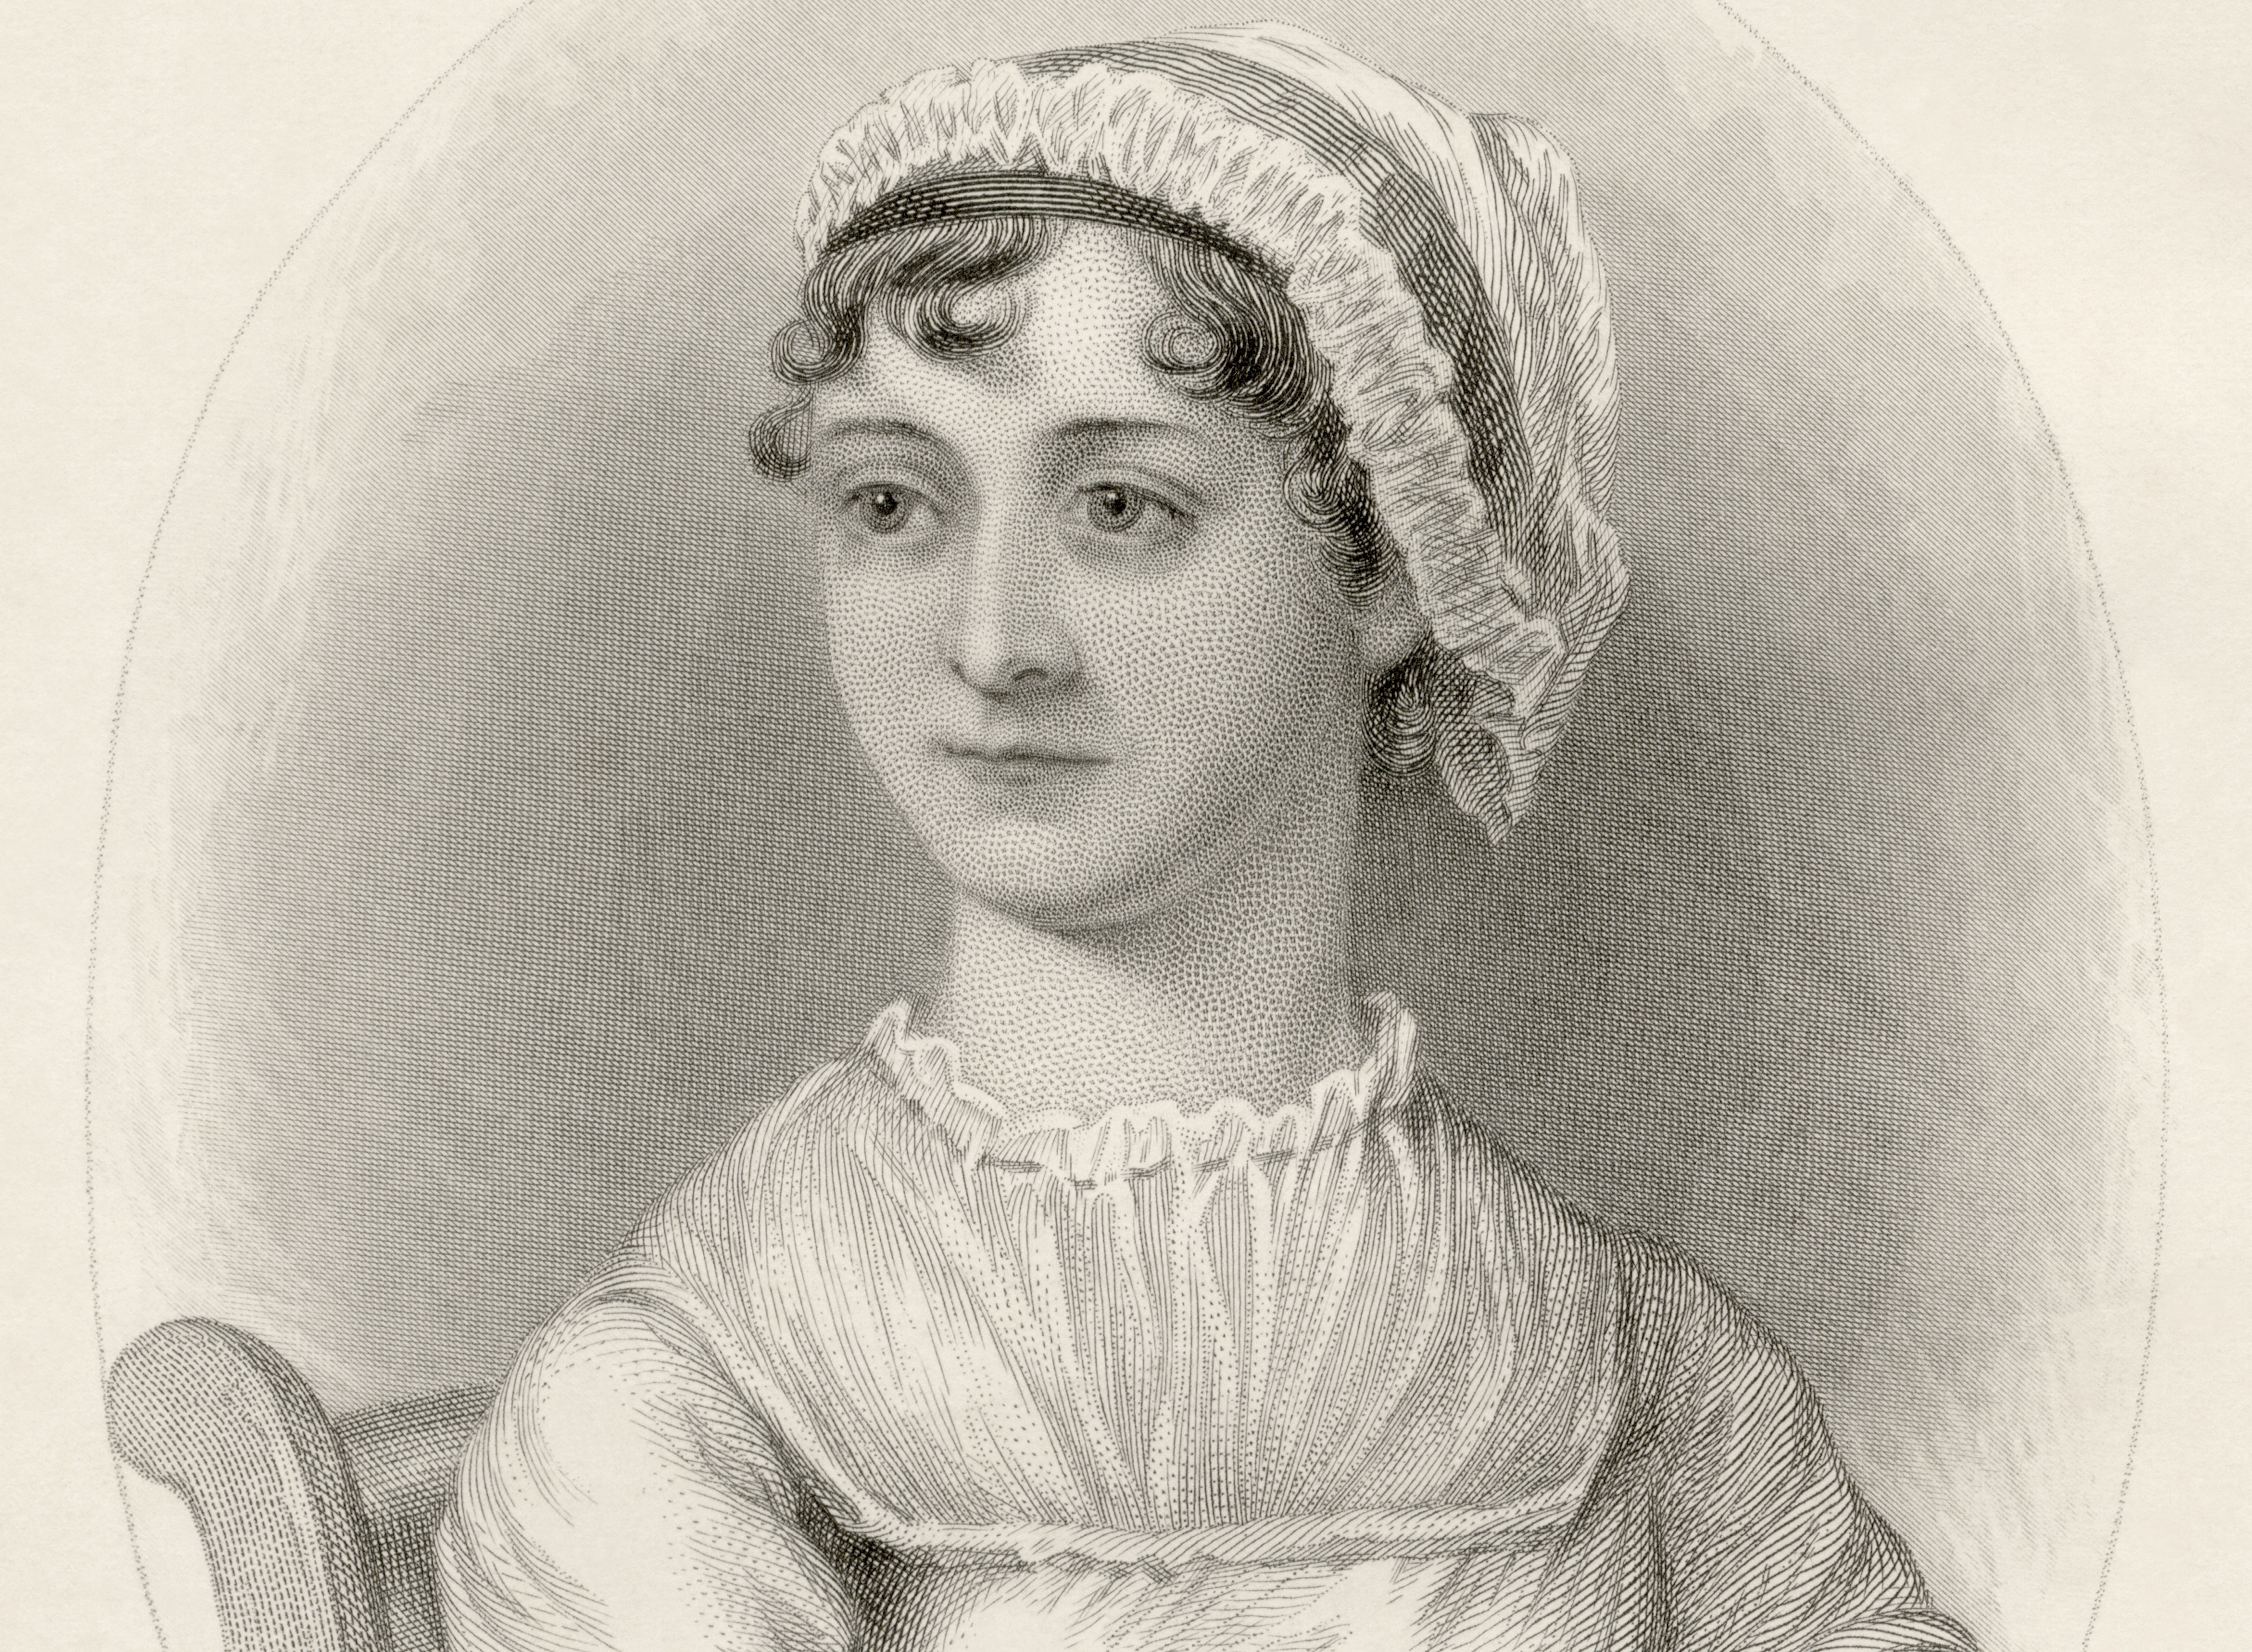 Telling Her Own Story: The Life and Work of Jane Austen - Radical Tea Towel